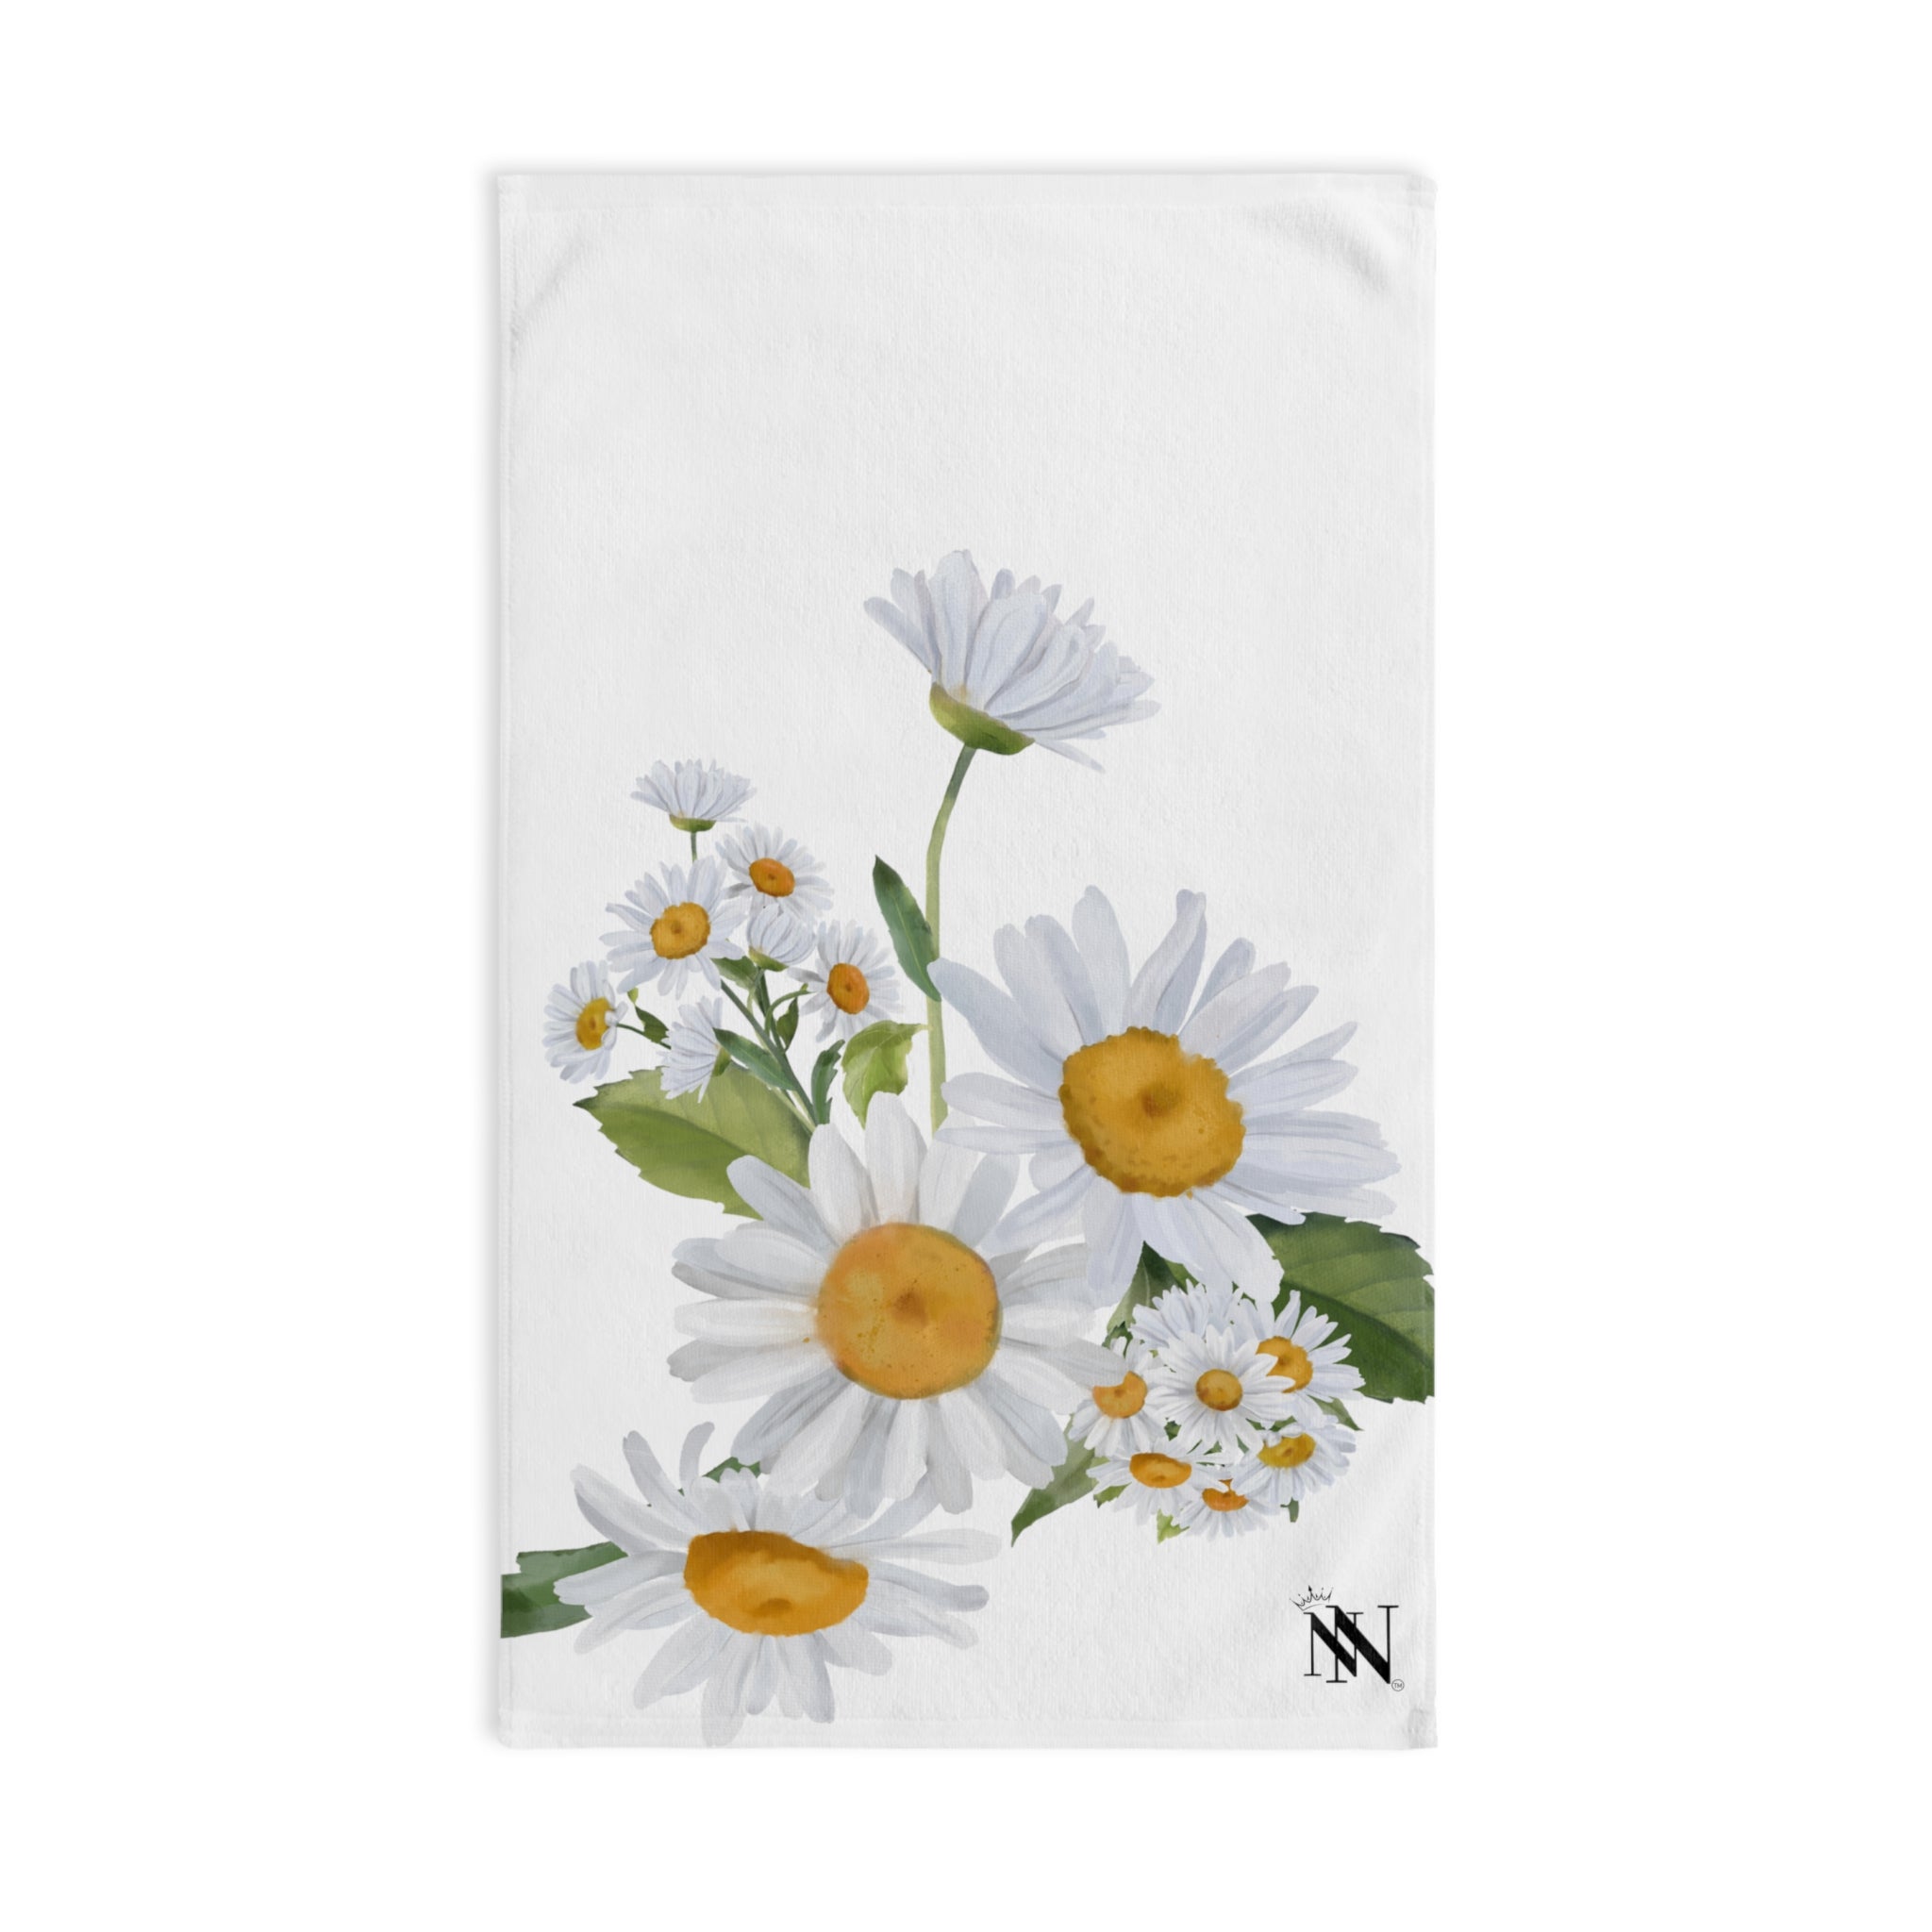 Daisy Bouquet White | Funny Gifts for Men - Gifts for Him - Birthday Gifts for Men, Him, Her, Husband, Boyfriend, Girlfriend, New Couple Gifts, Fathers & Valentines Day Gifts, Christmas Gifts NECTAR NAPKINS